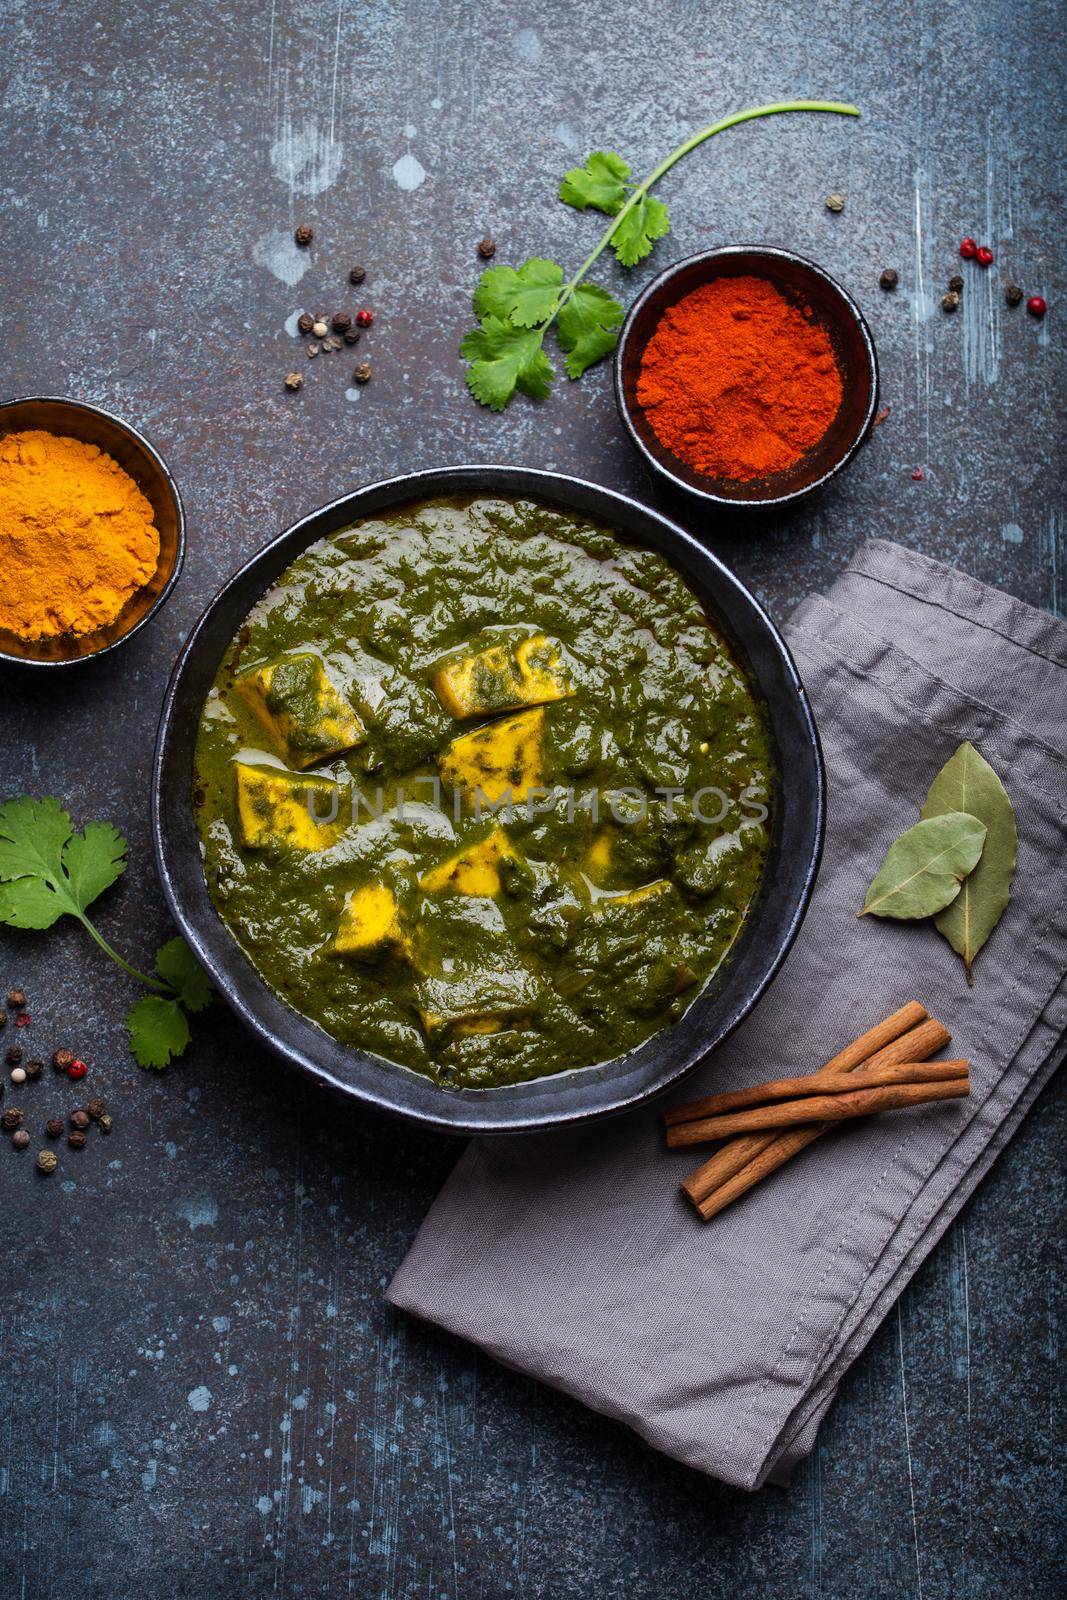 Palak paneer, traditional vegetarian Indian dish with cheese paneer, pureed spinach and spices. Indian green paneer curry in rustic ceramic bowl on concrete background, top view